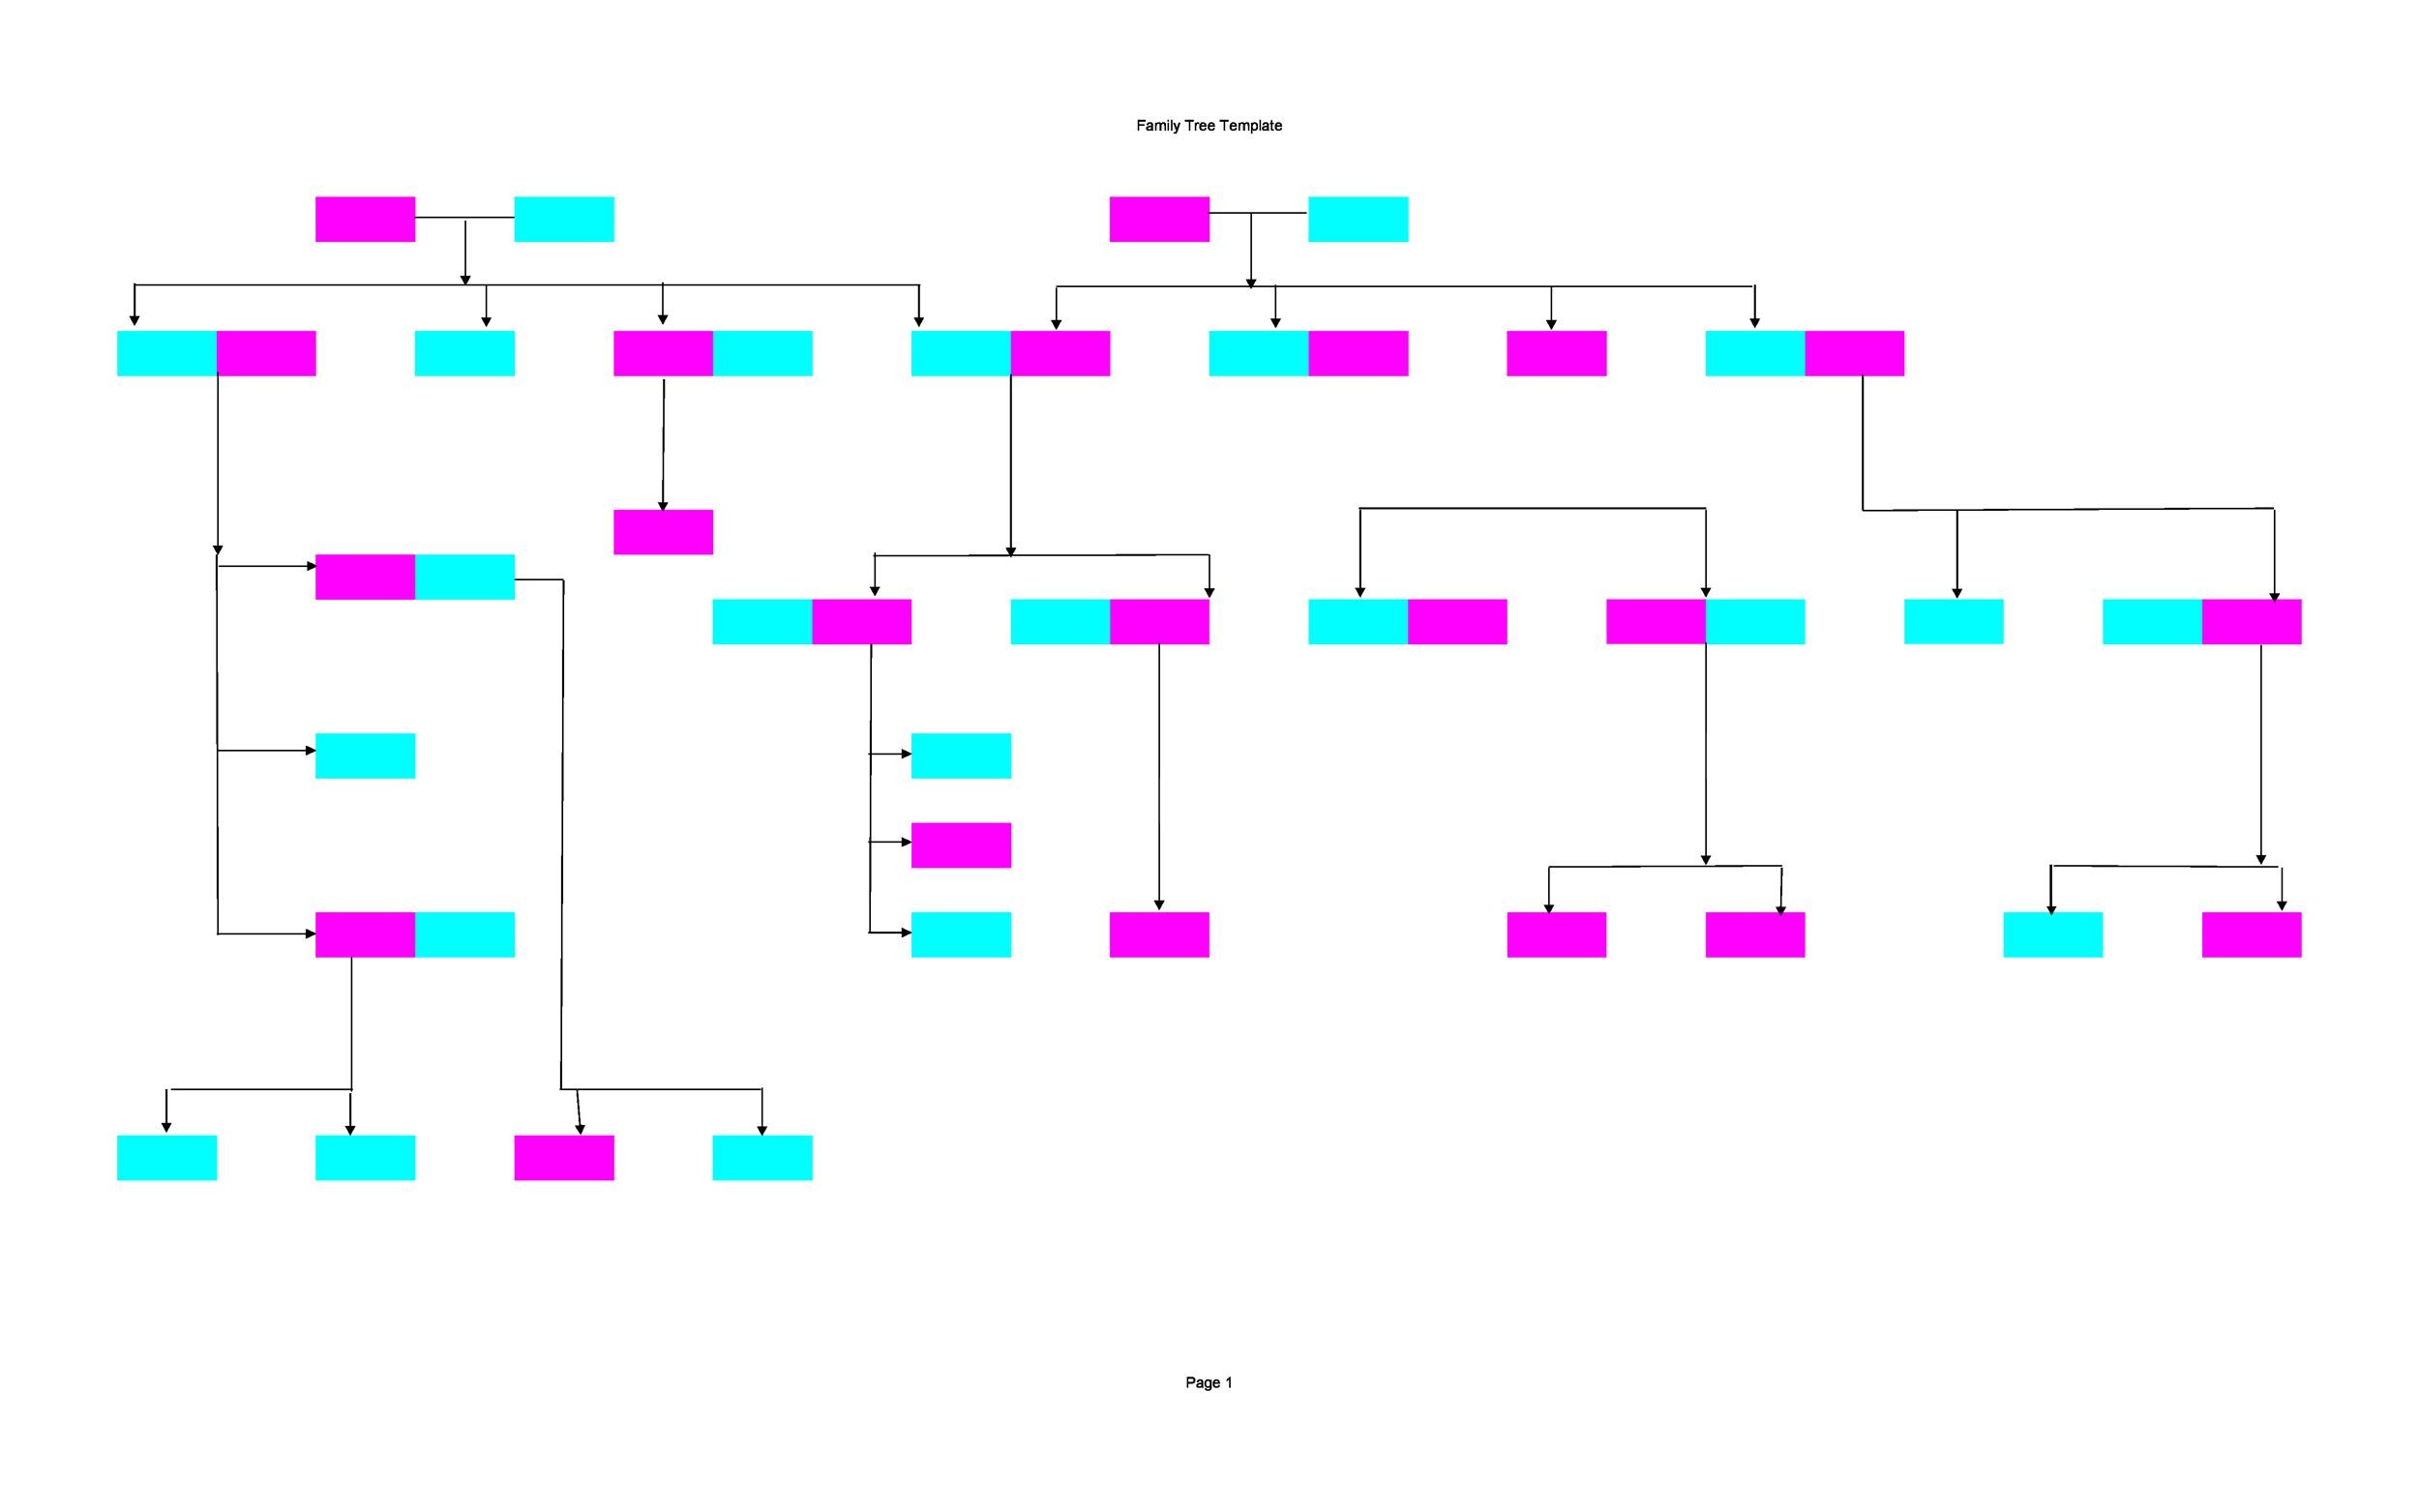 Free Family Tree Template With Siblings And Cousins from templatelab.com